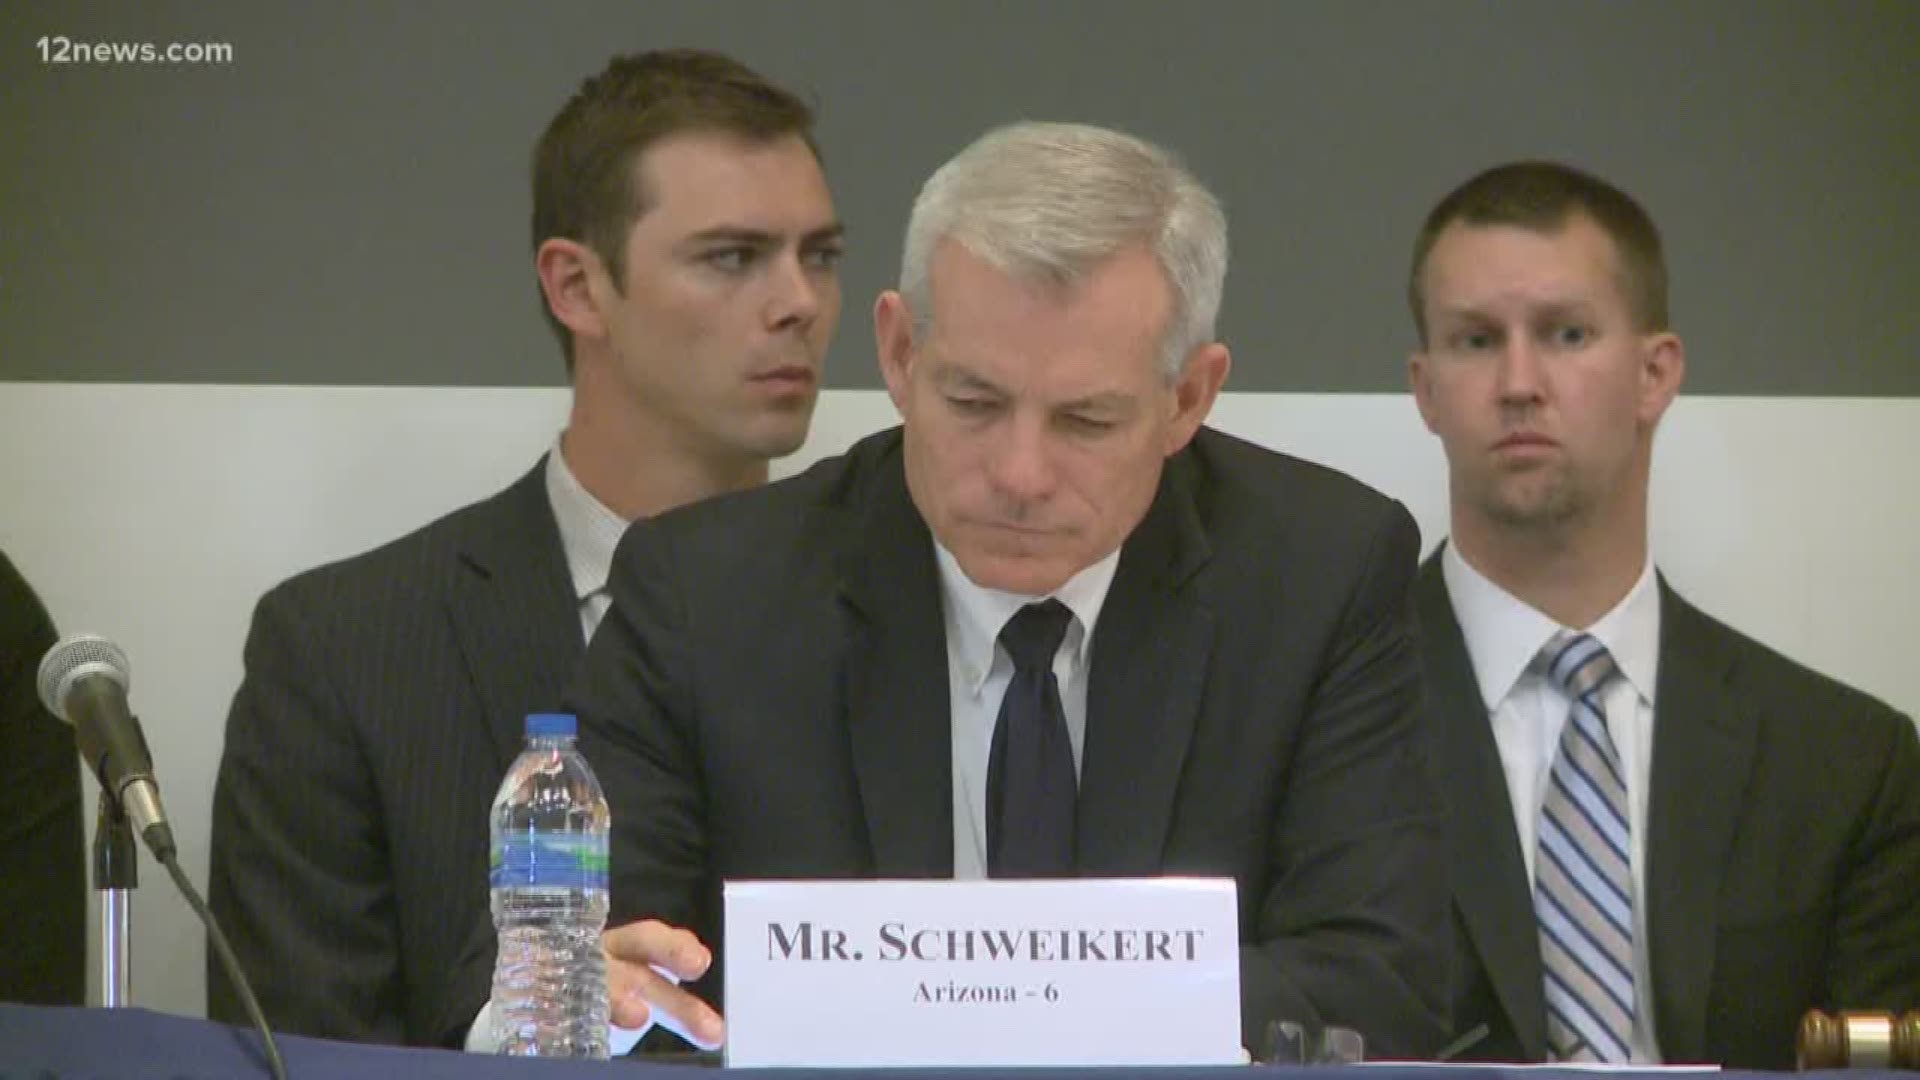 The investigation follows reports of generous spending by Schweikert's chief of staff and a complaint that he exceeded how much money he can earn from a second job.